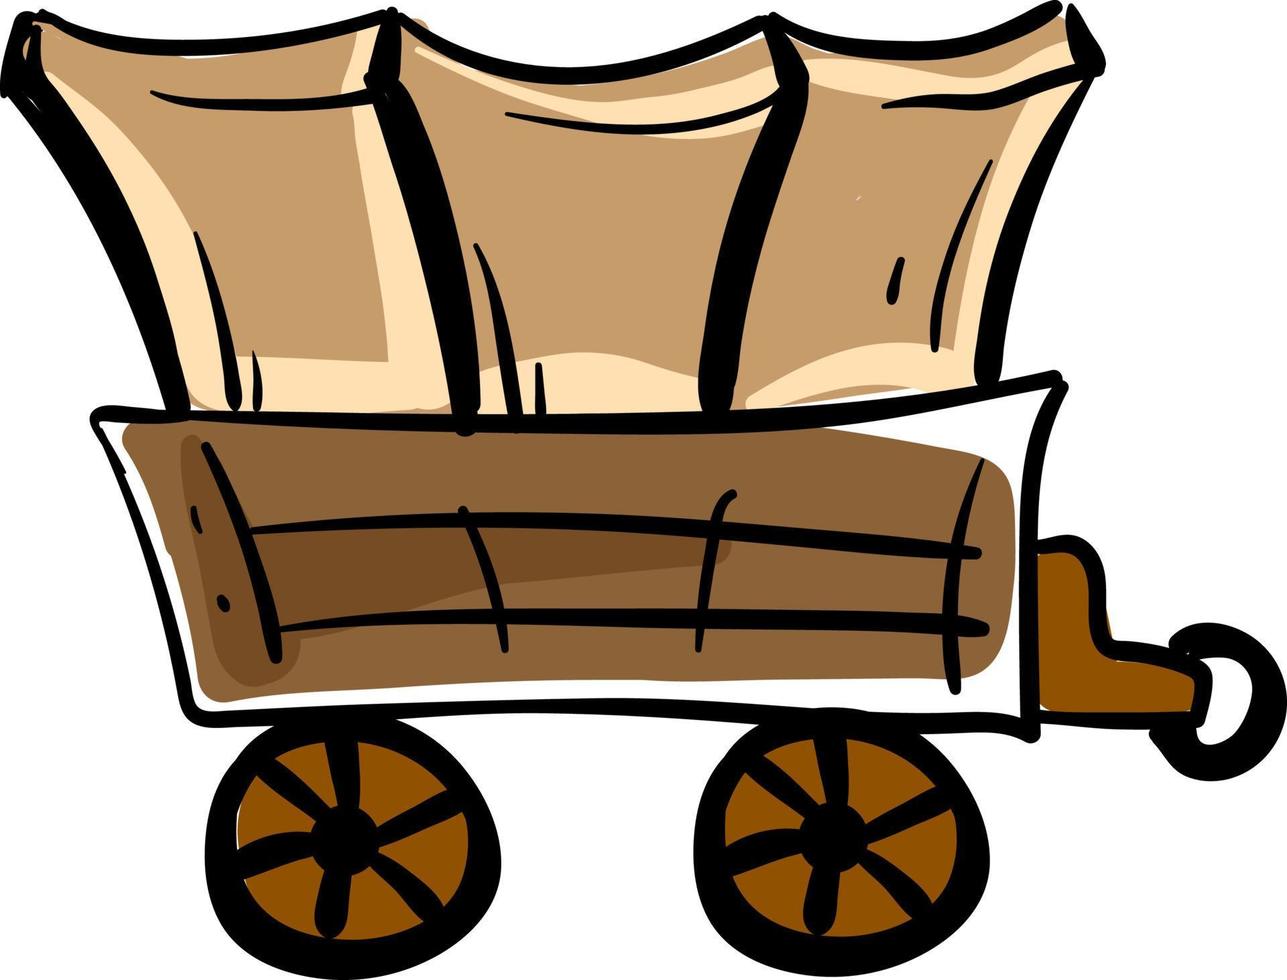 Wooden wagon, illustration, vector on white background